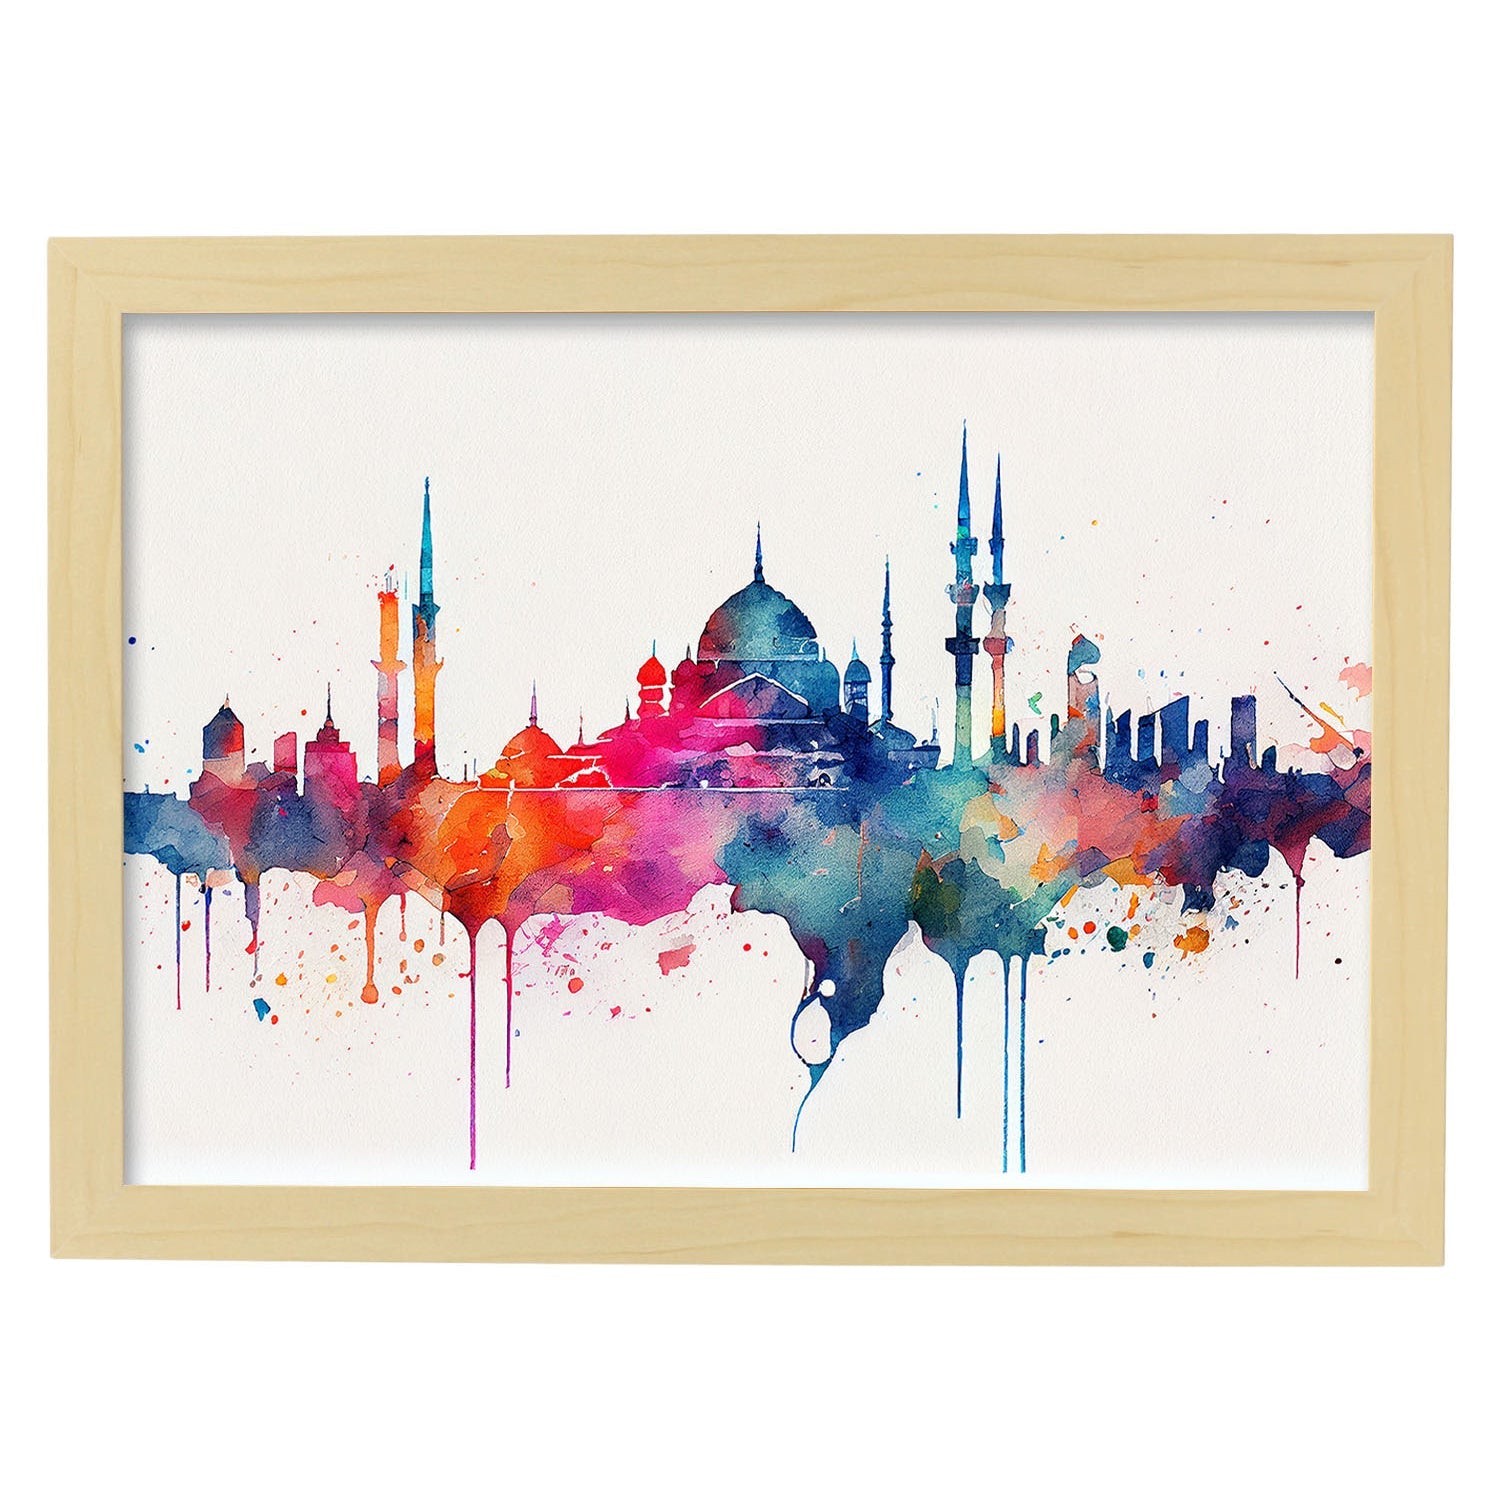 Nacnic watercolor of a skyline of the city of Istanbul_2. Aesthetic Wall Art Prints for Bedroom or Living Room Design.-Artwork-Nacnic-A4-Marco Madera Clara-Nacnic Estudio SL